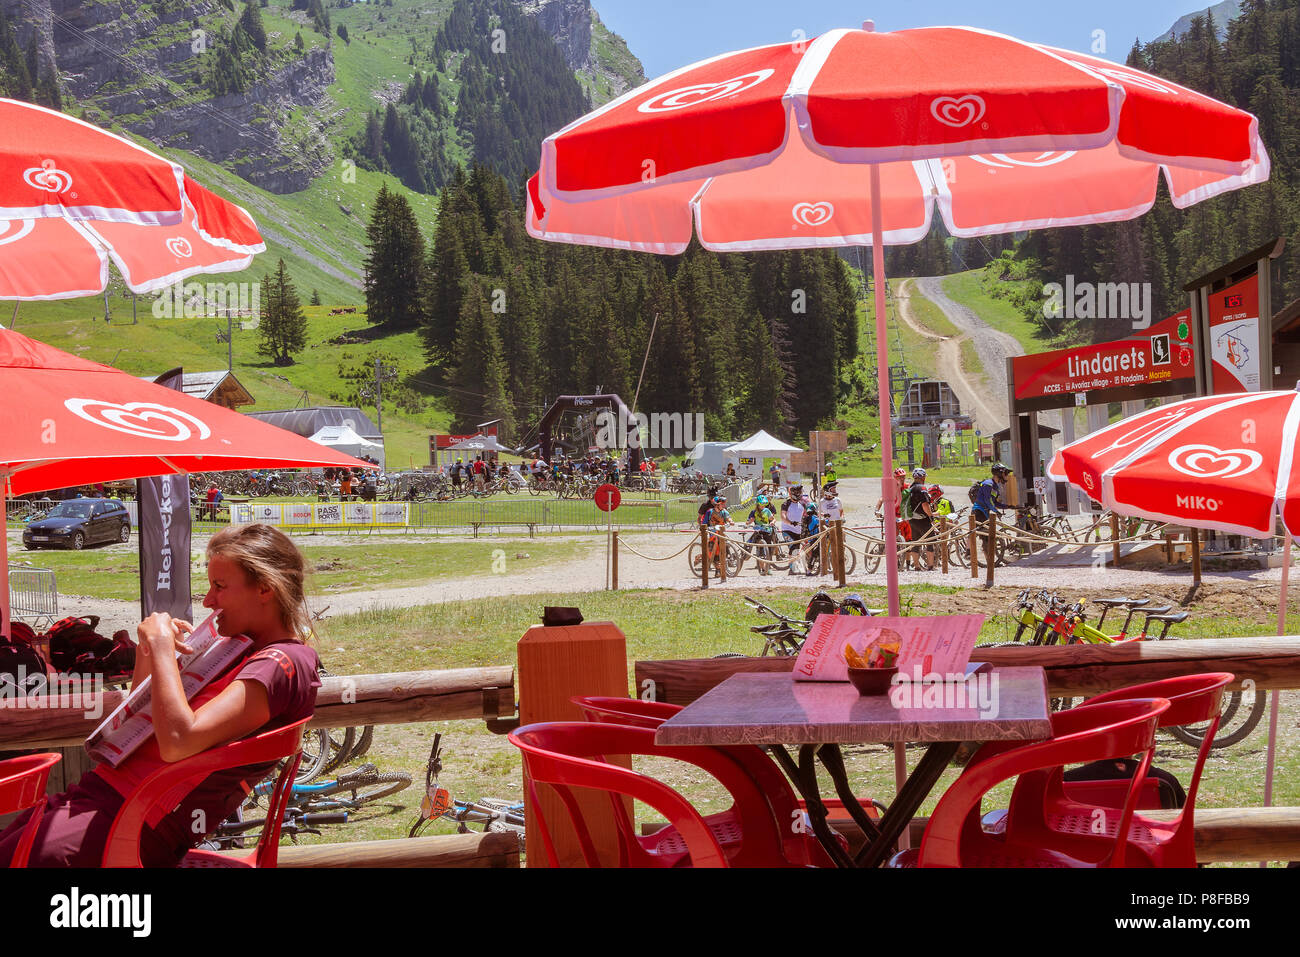 The Beautiful Chalet Style Les Barmettes Restaurant and Bar with Red Umbrellas at Les Lindarets near Montriond Haute-Savoie France Stock Photo